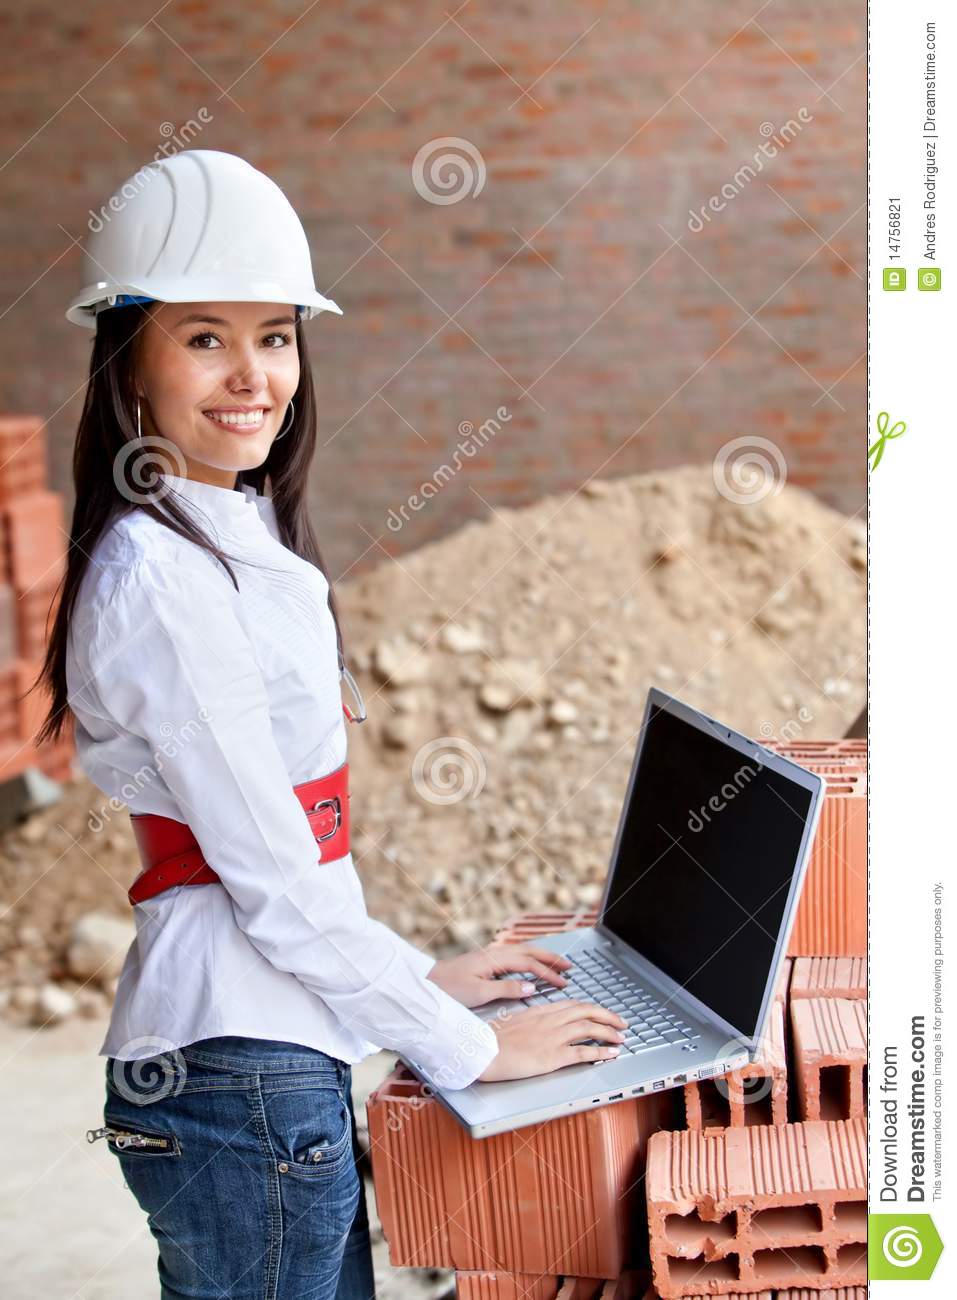 Female Engineer With A Computer Stock Image   Image  14756821